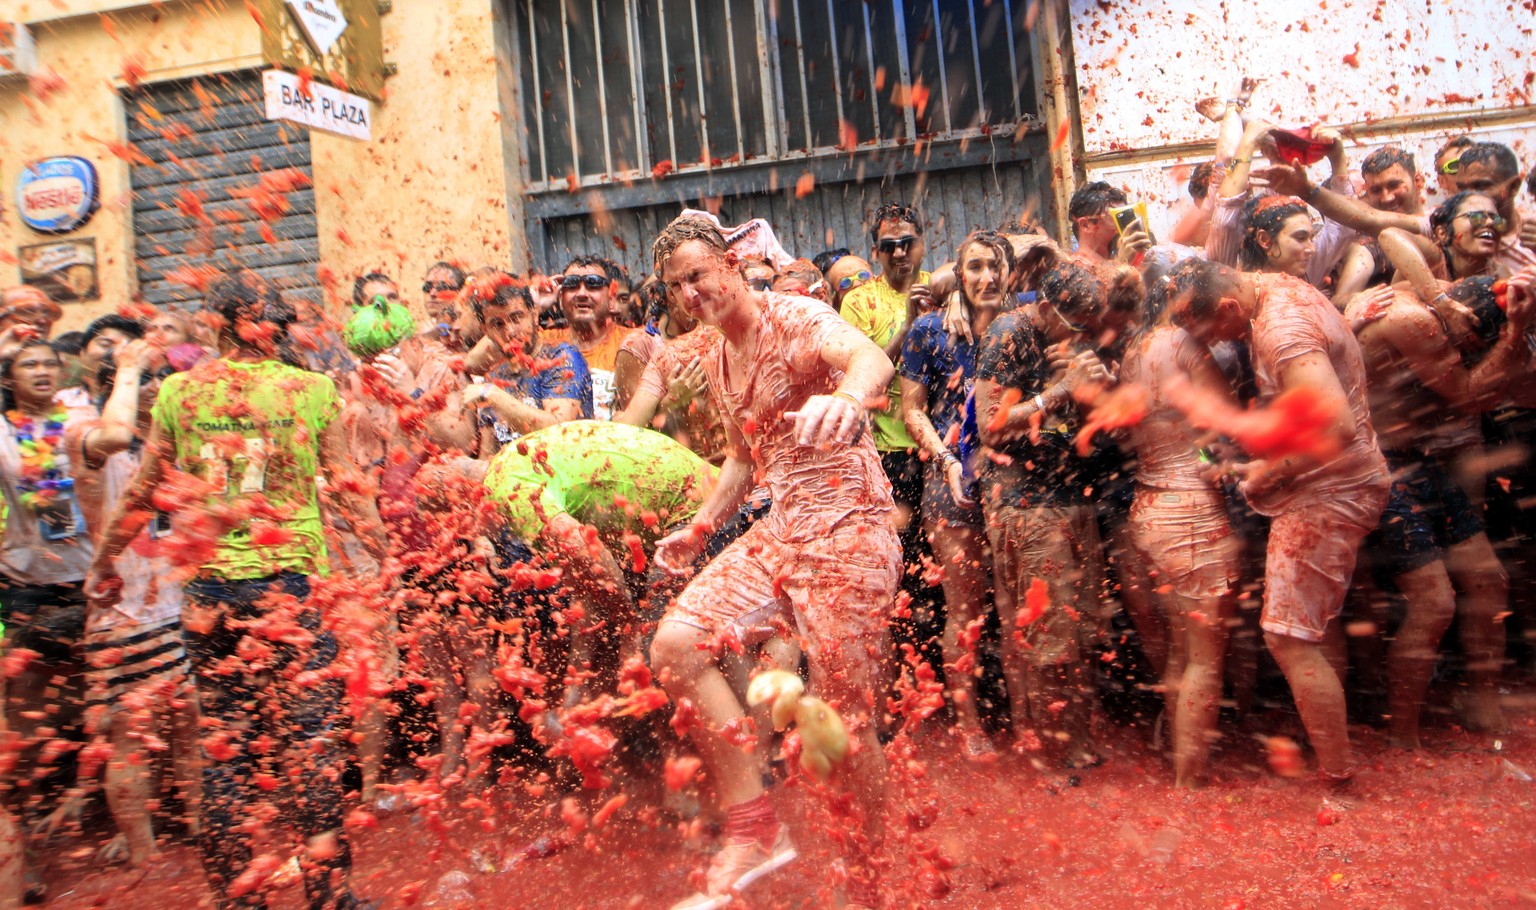 Revelers enjoy as they throw tomatoes at each other, during the annual &quot;Tomatina&quot;, tomato fight fiesta, in the village of Bunol, 50 kilometers outside Valencia, Spain, Wednesday, Aug. 30, 20 ...